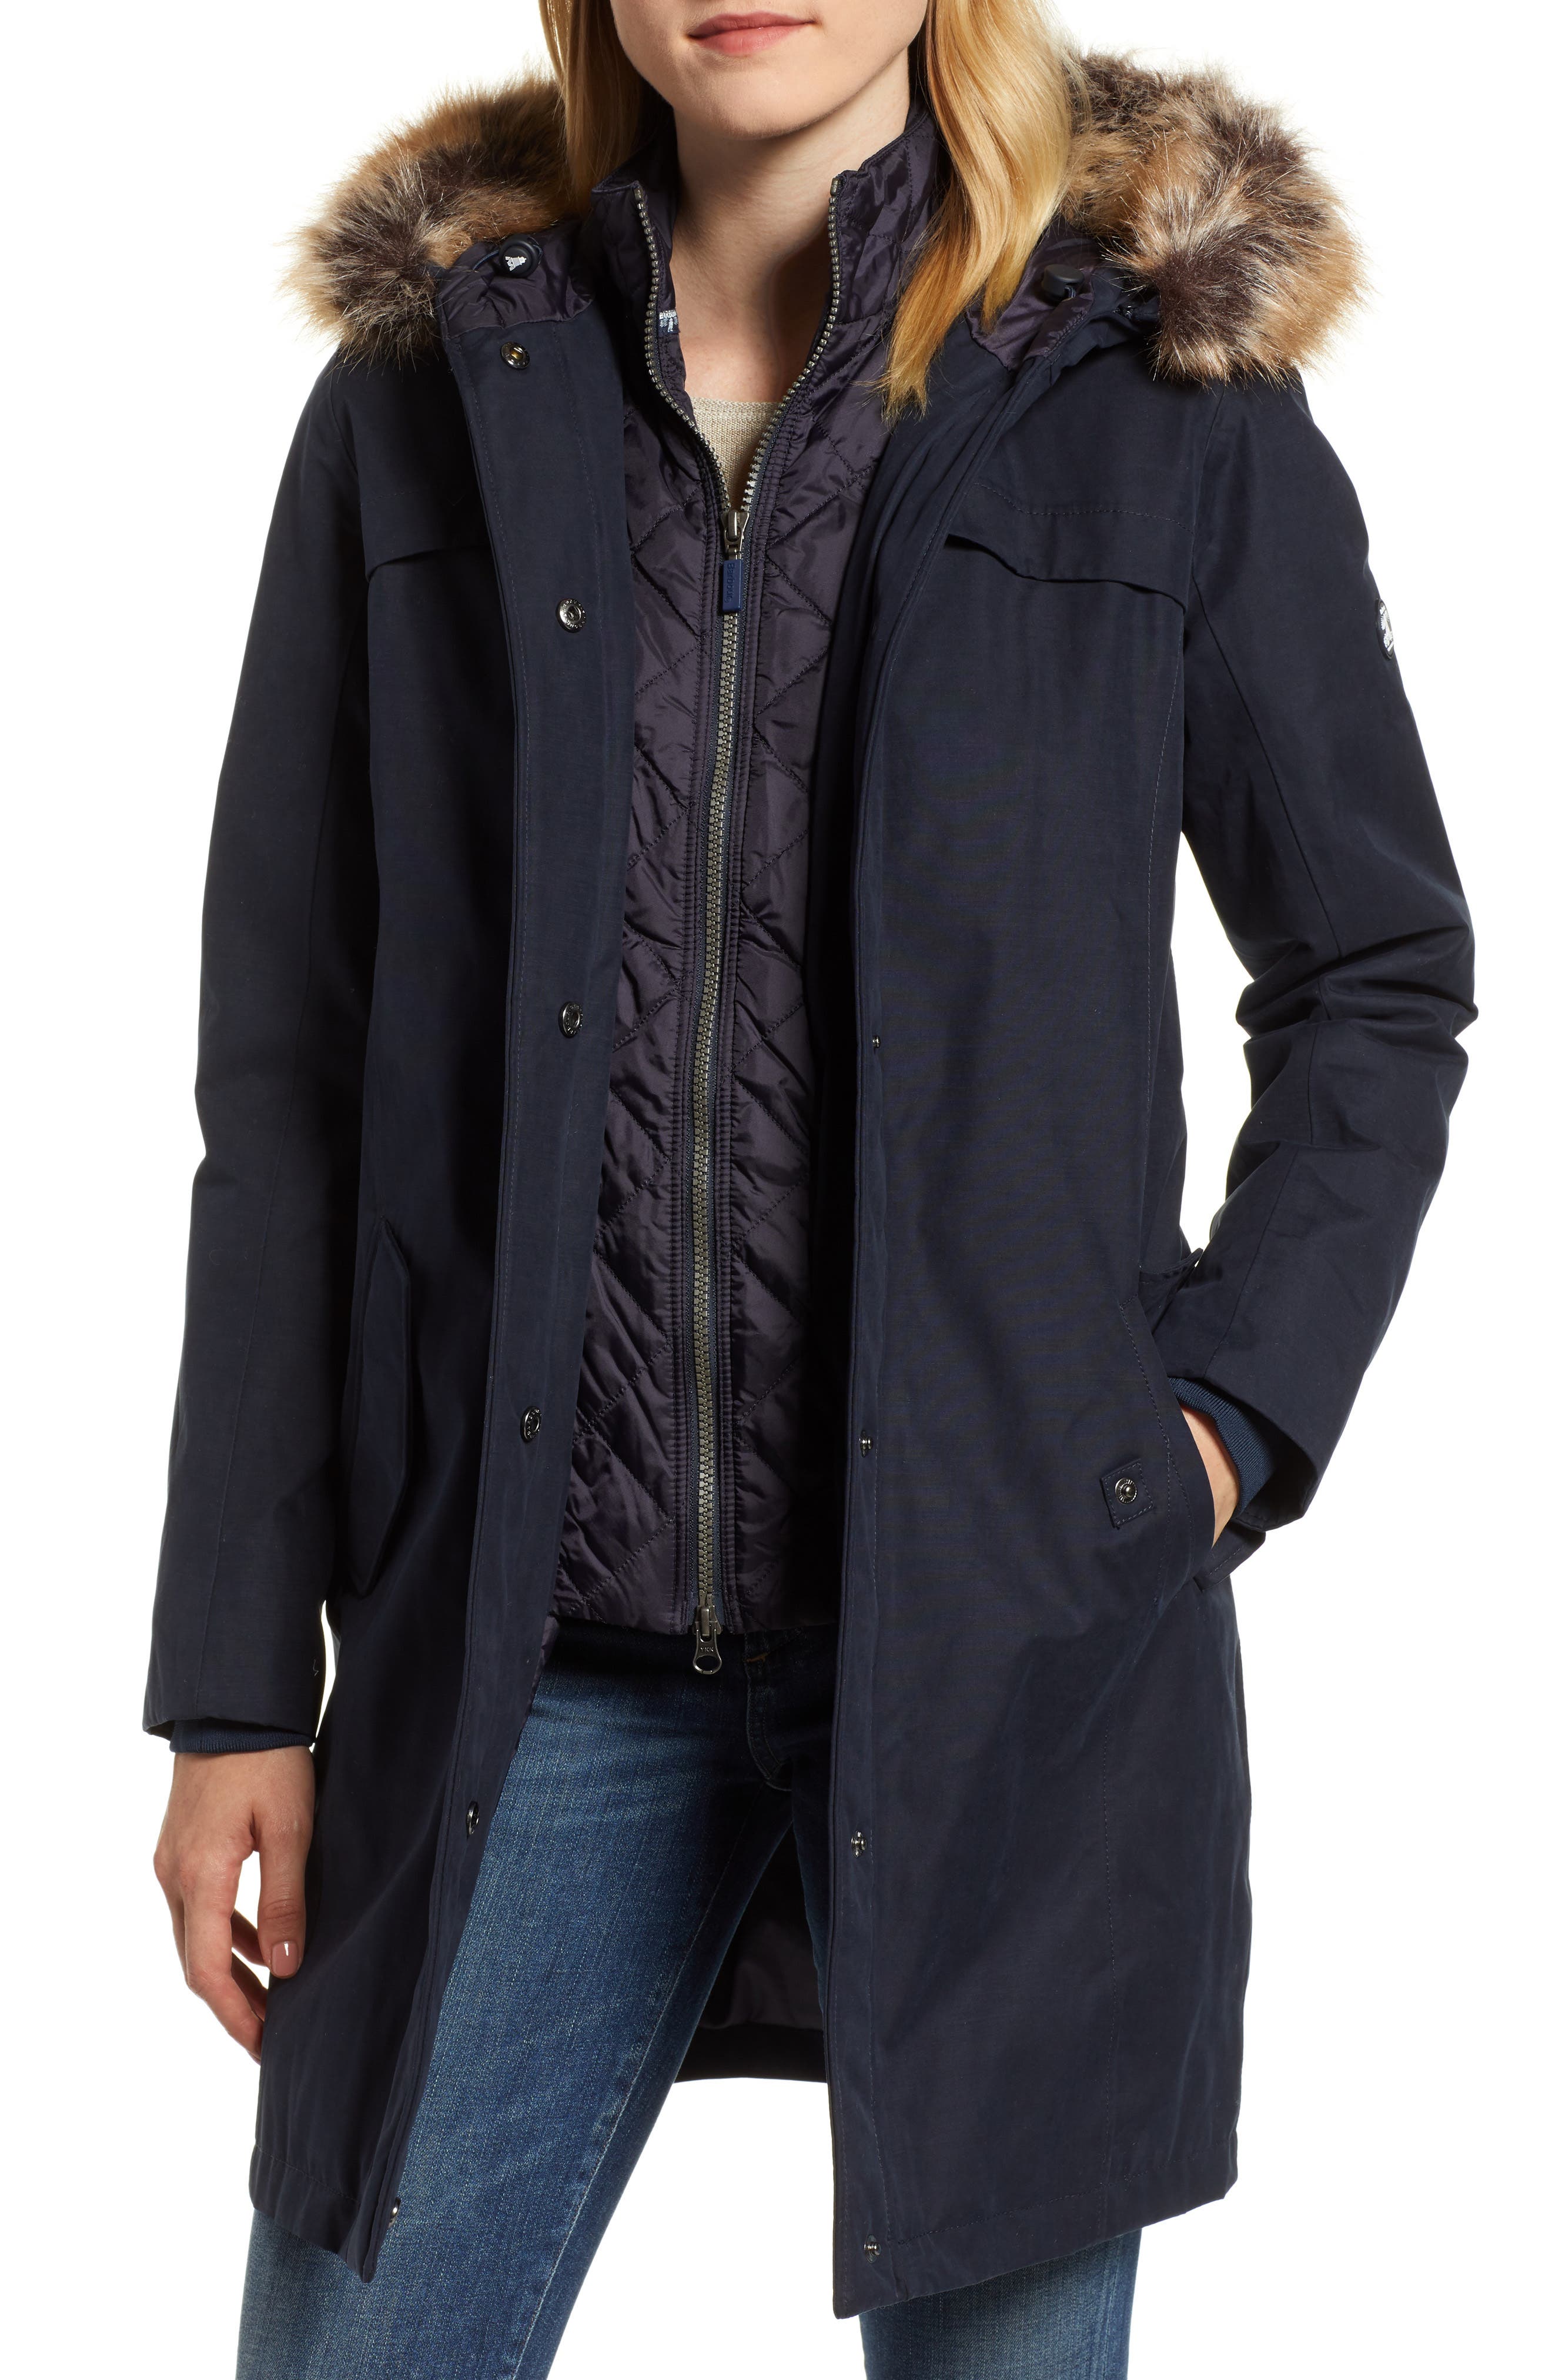 Barbour of England - Women's - Country / Outddors Clothing